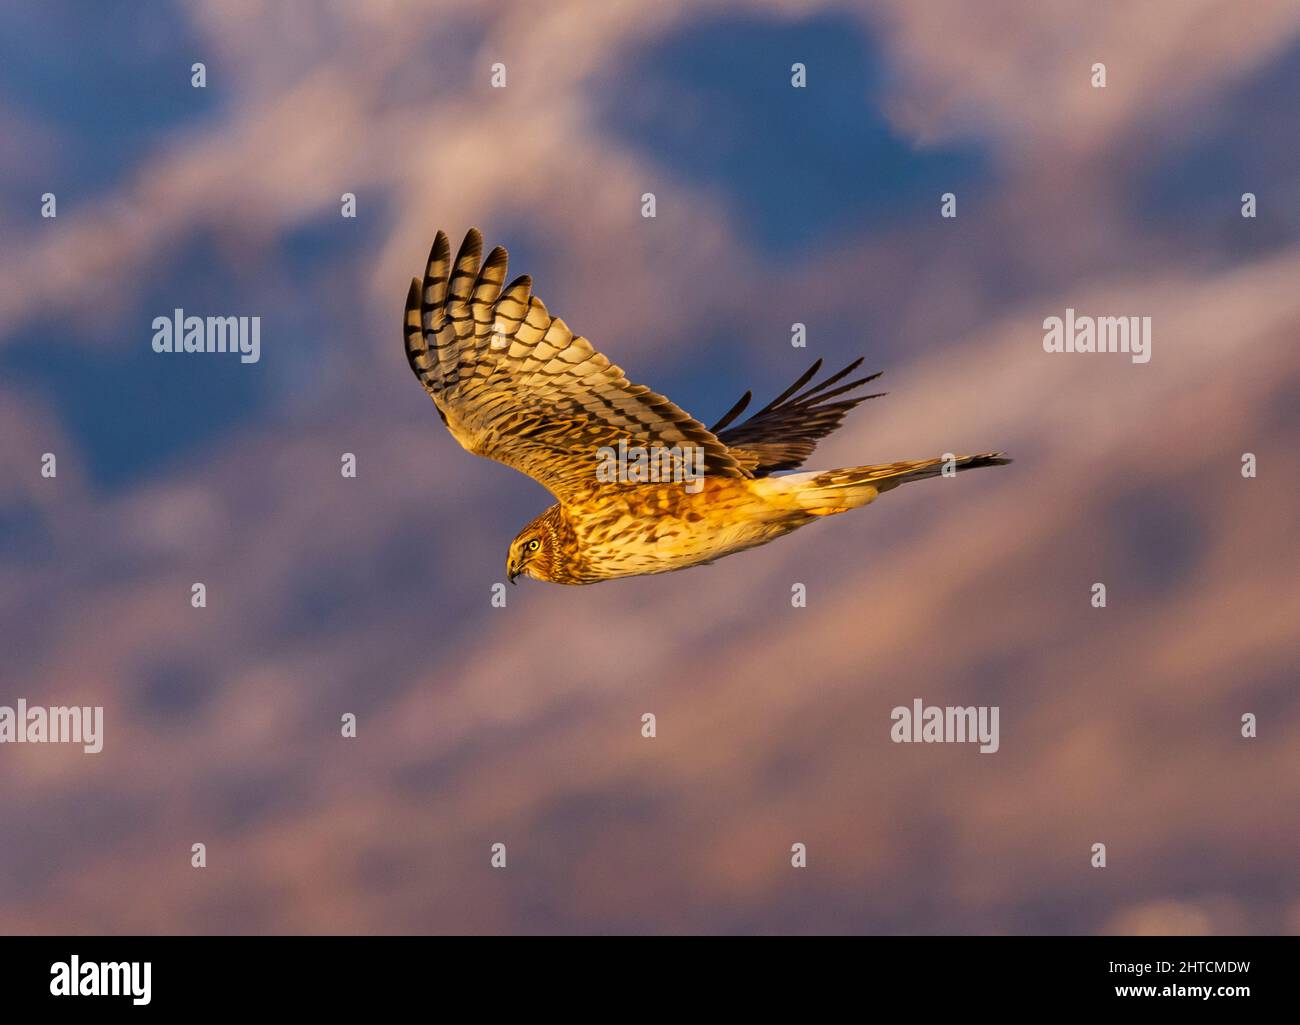 A Northern Harrier (Circus cyaneus) glides over Unit 1 in the light of the setting sun at Farmington Bay Waterfowl Management Area, Farmington, Utah. Stock Photo